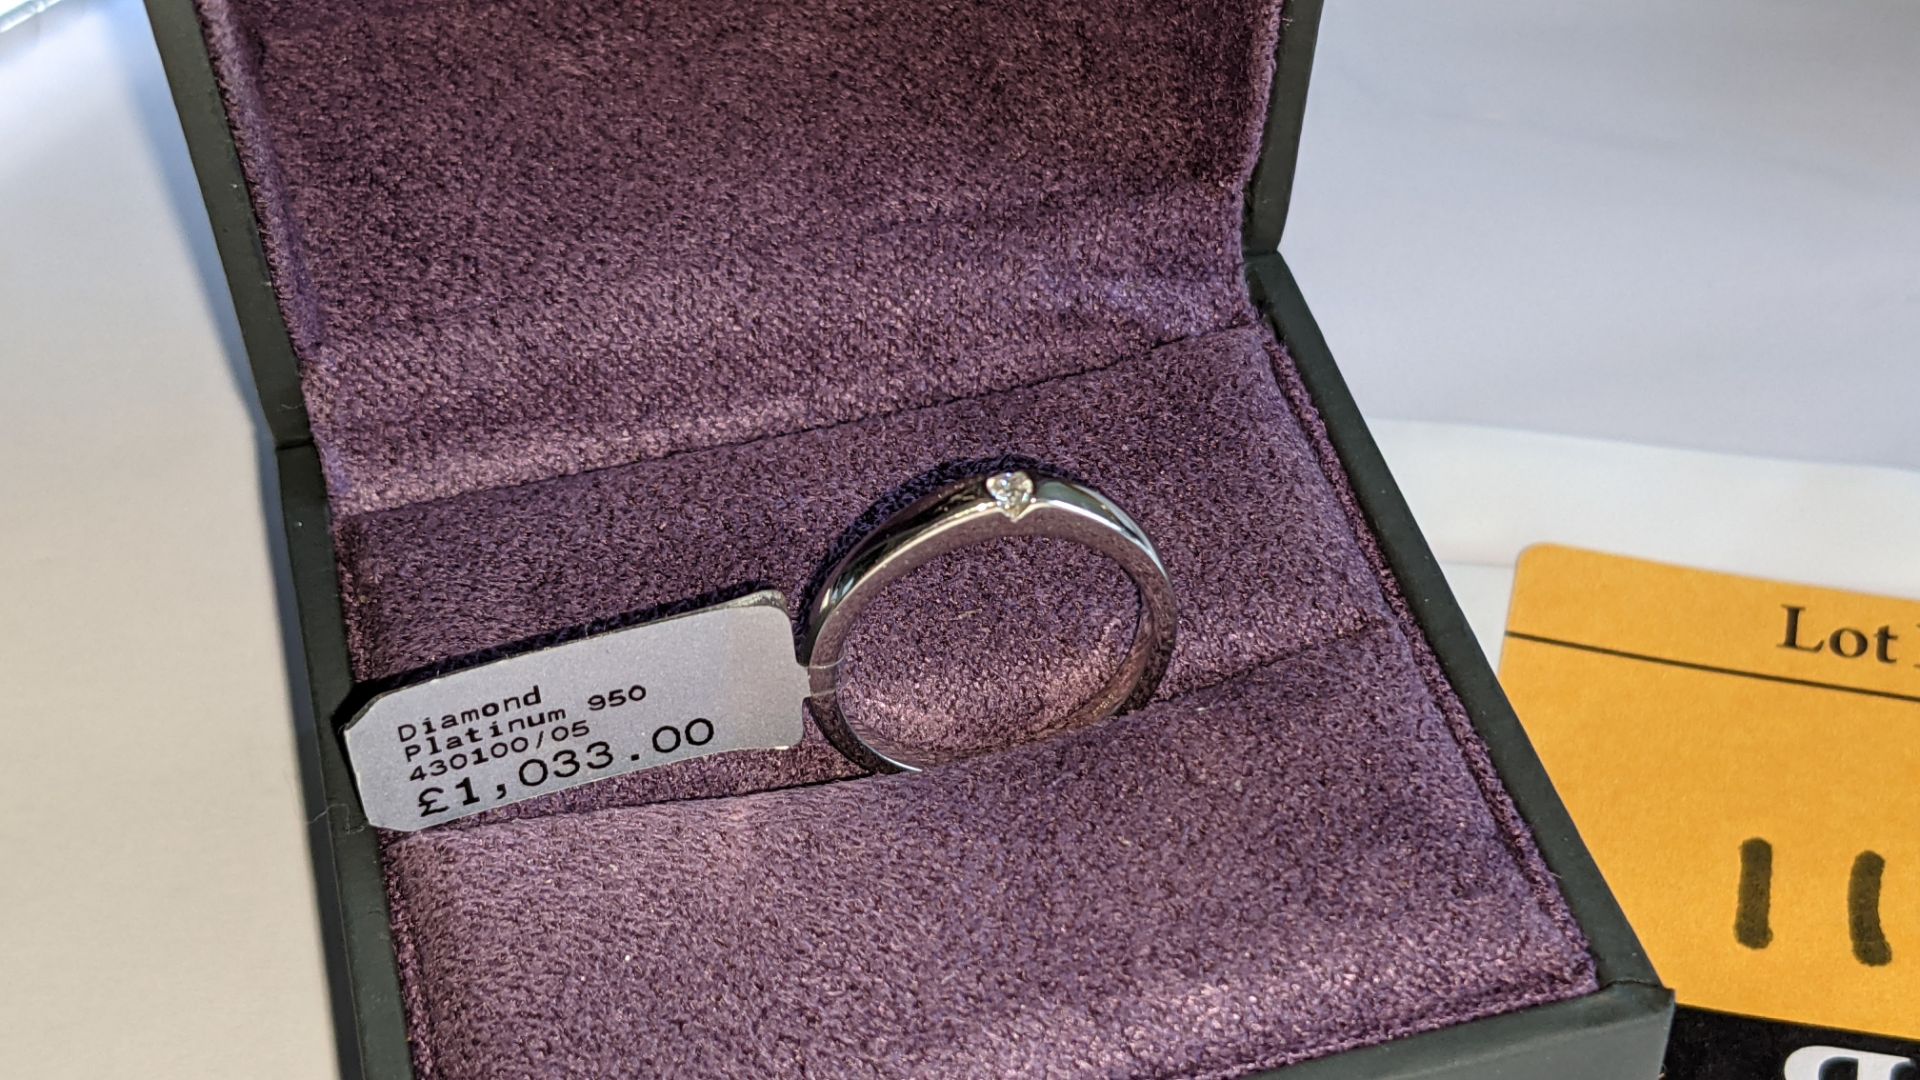 Platinum 950 ring with 0.05ct H/Si diamond. RRP £1,033 - Image 2 of 13